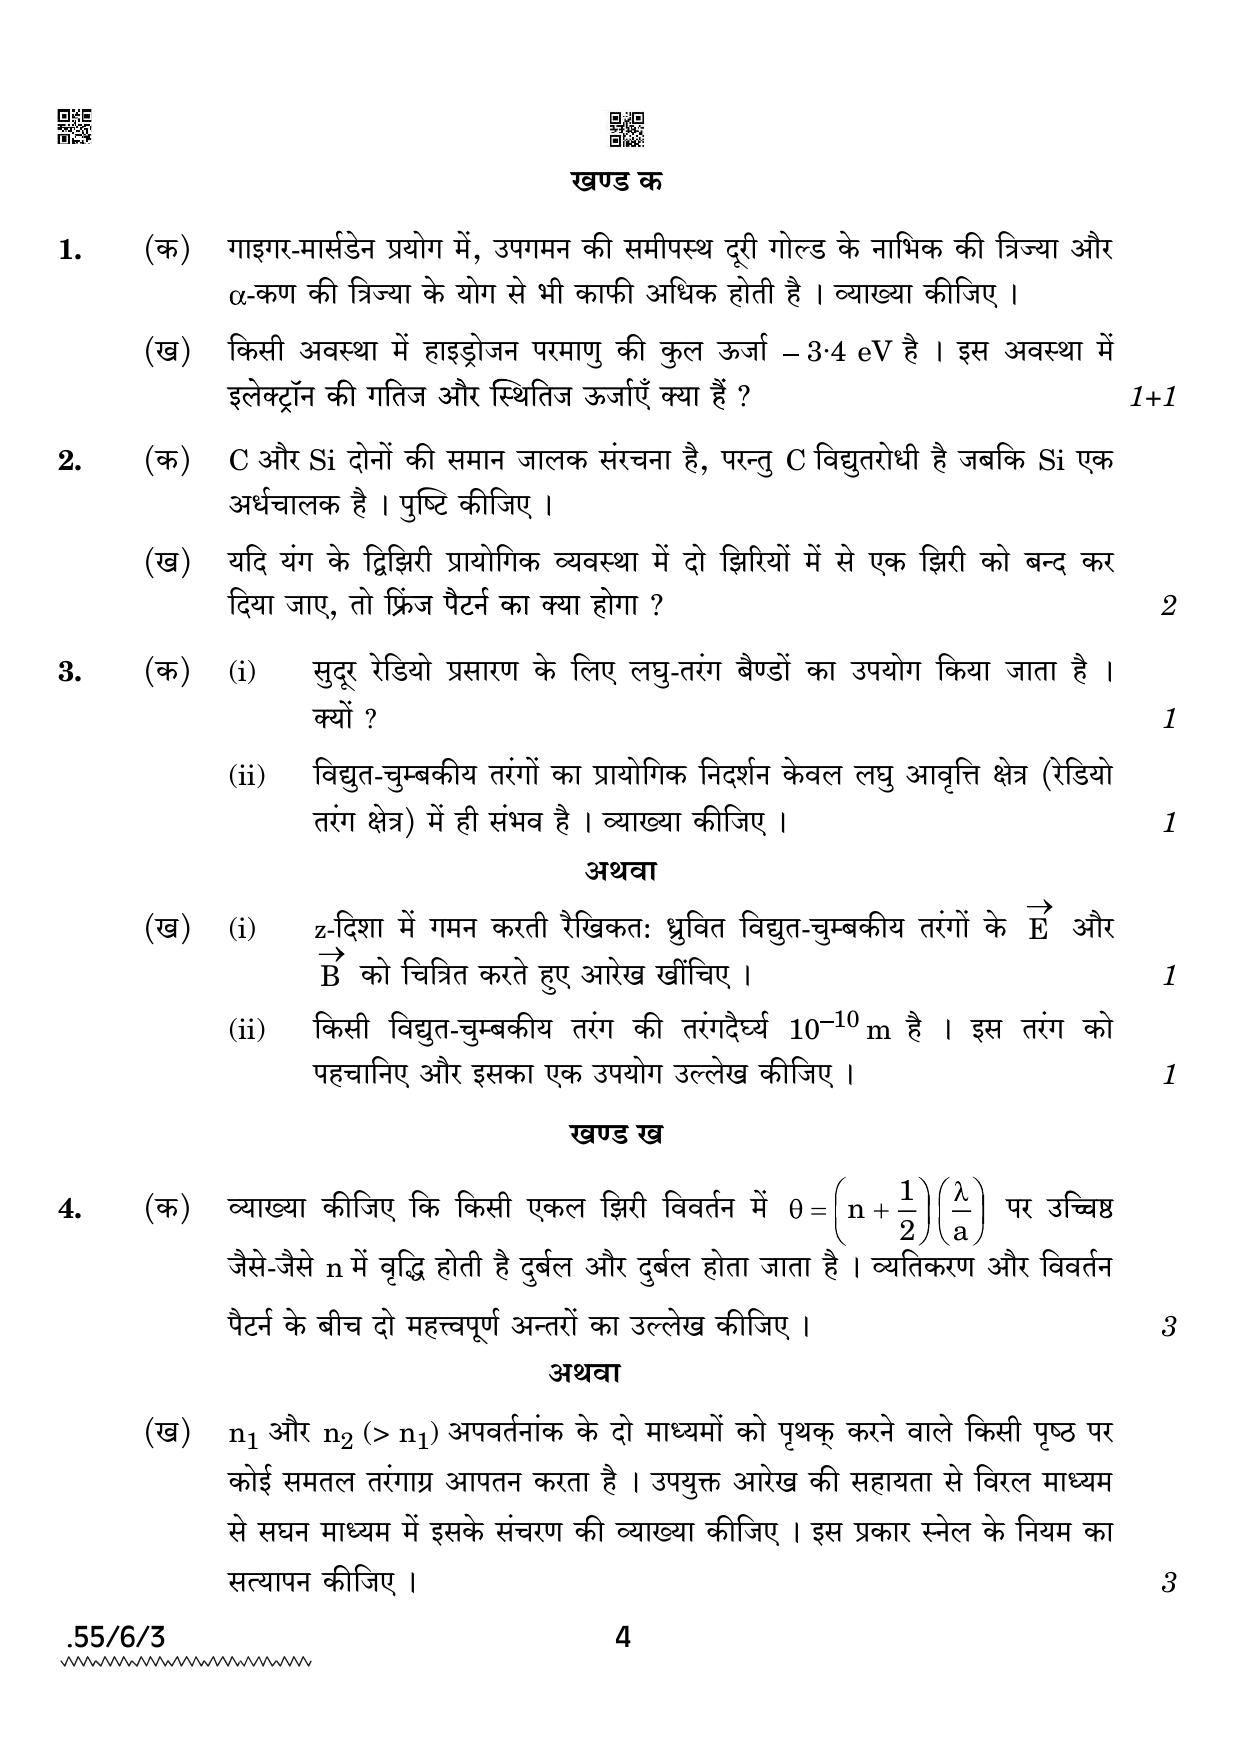 CBSE Class 12 55-6-3 PHYSICS 2022 Compartment Question Paper - Page 4